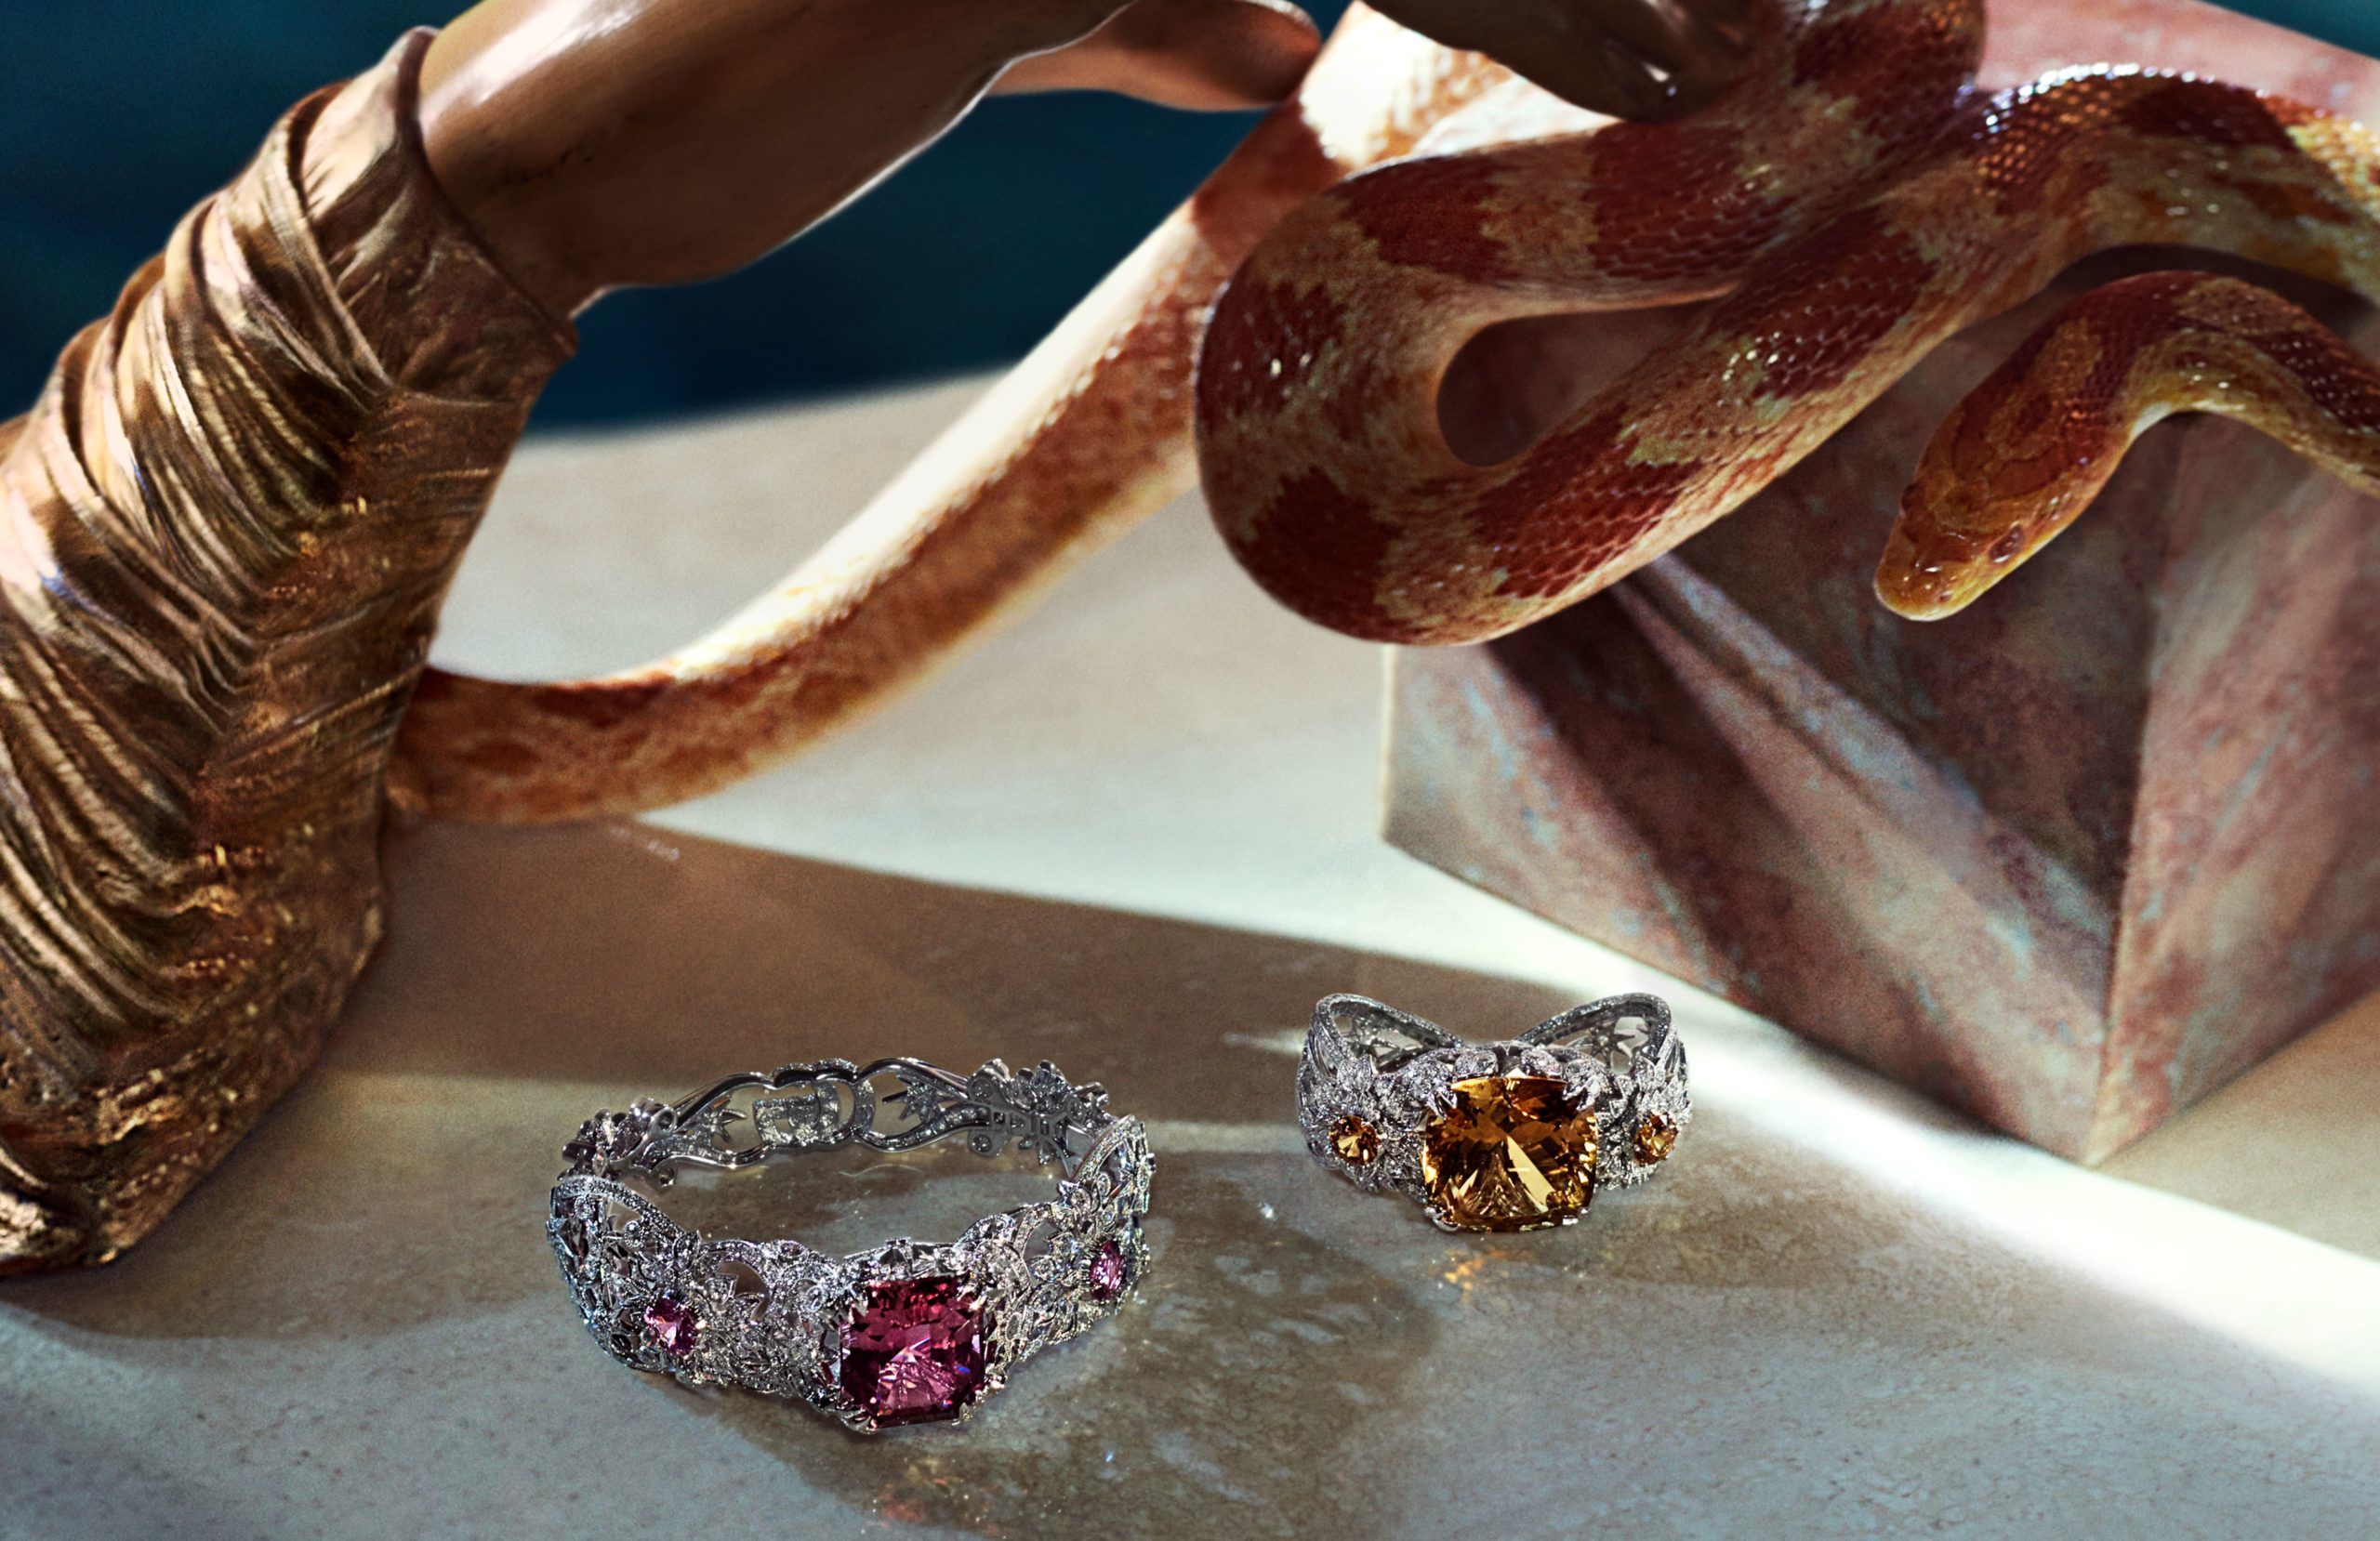 Louis Vuitton Looks to the Stars for Second High Jewelry Collection